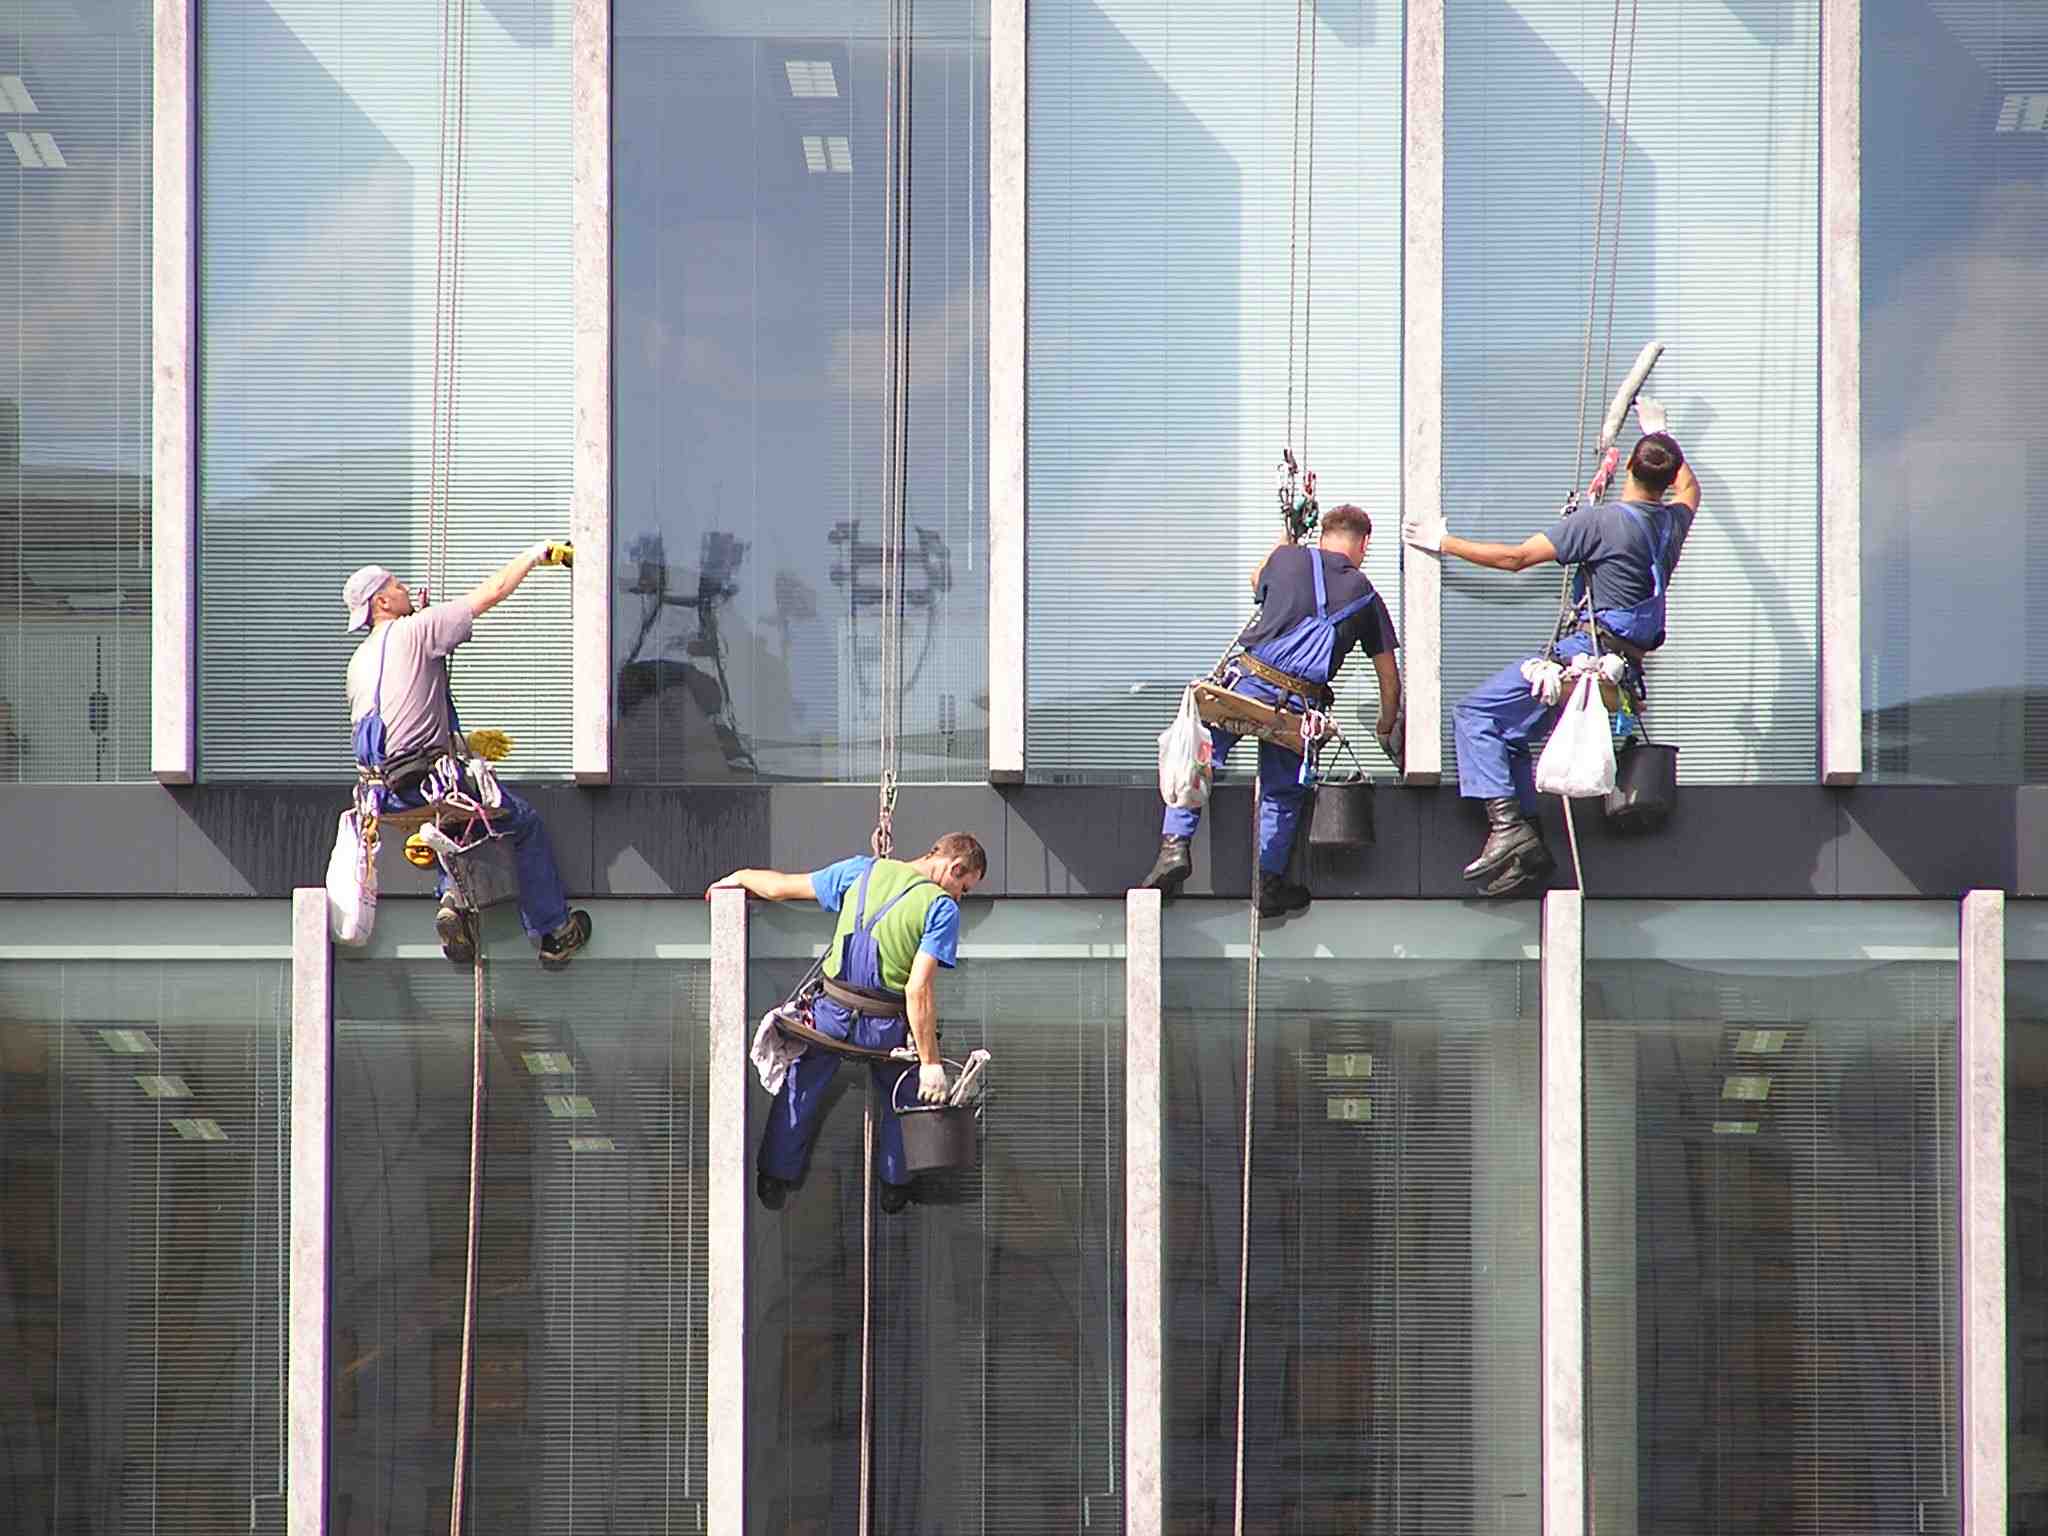 Window washing is one of the most hazardous occupations in the world.